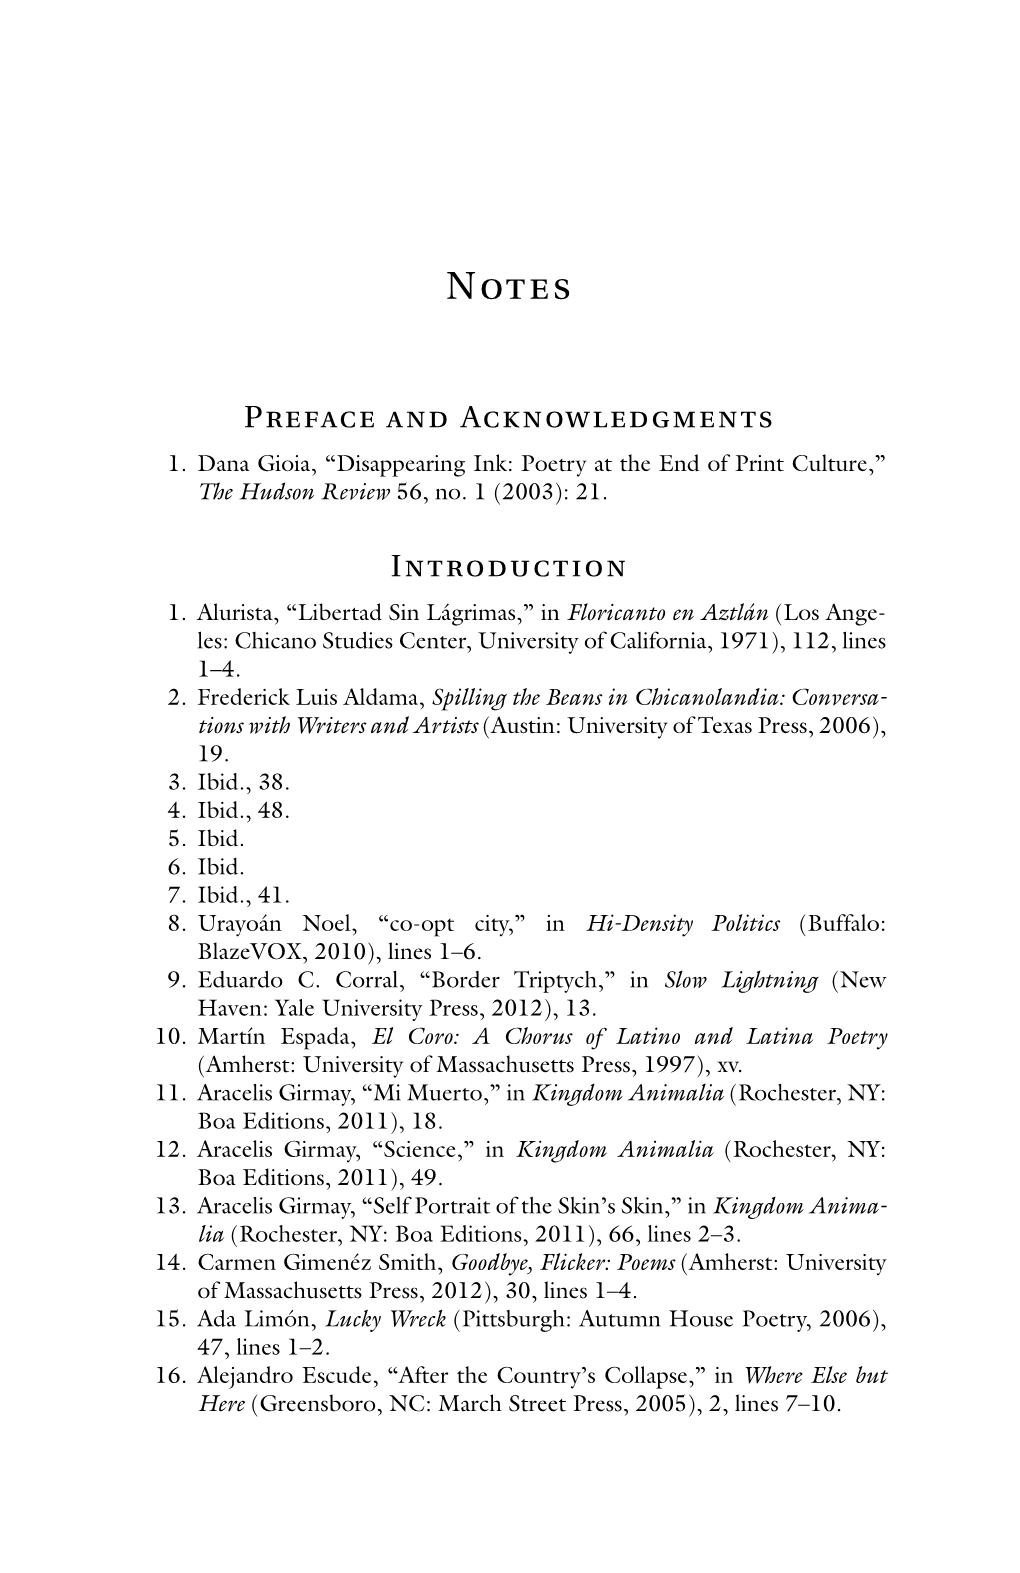 Preface and Acknowledgments Introduction